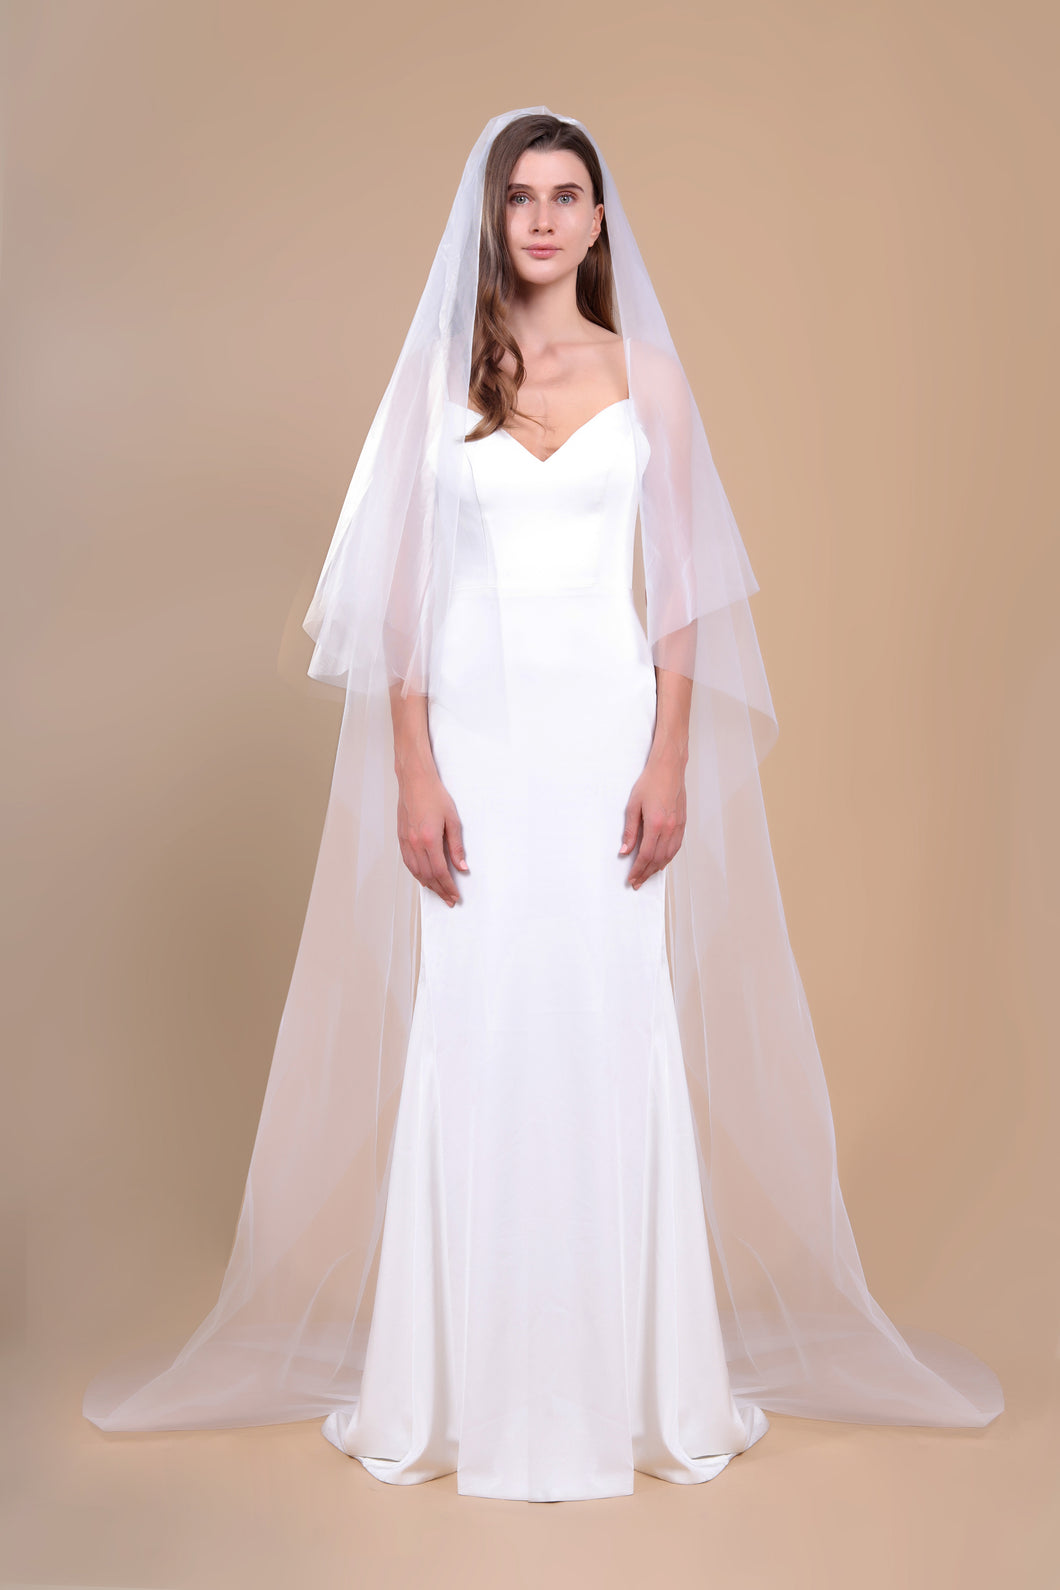 LUNA - two layer cathedral length veil with a simple edge finish